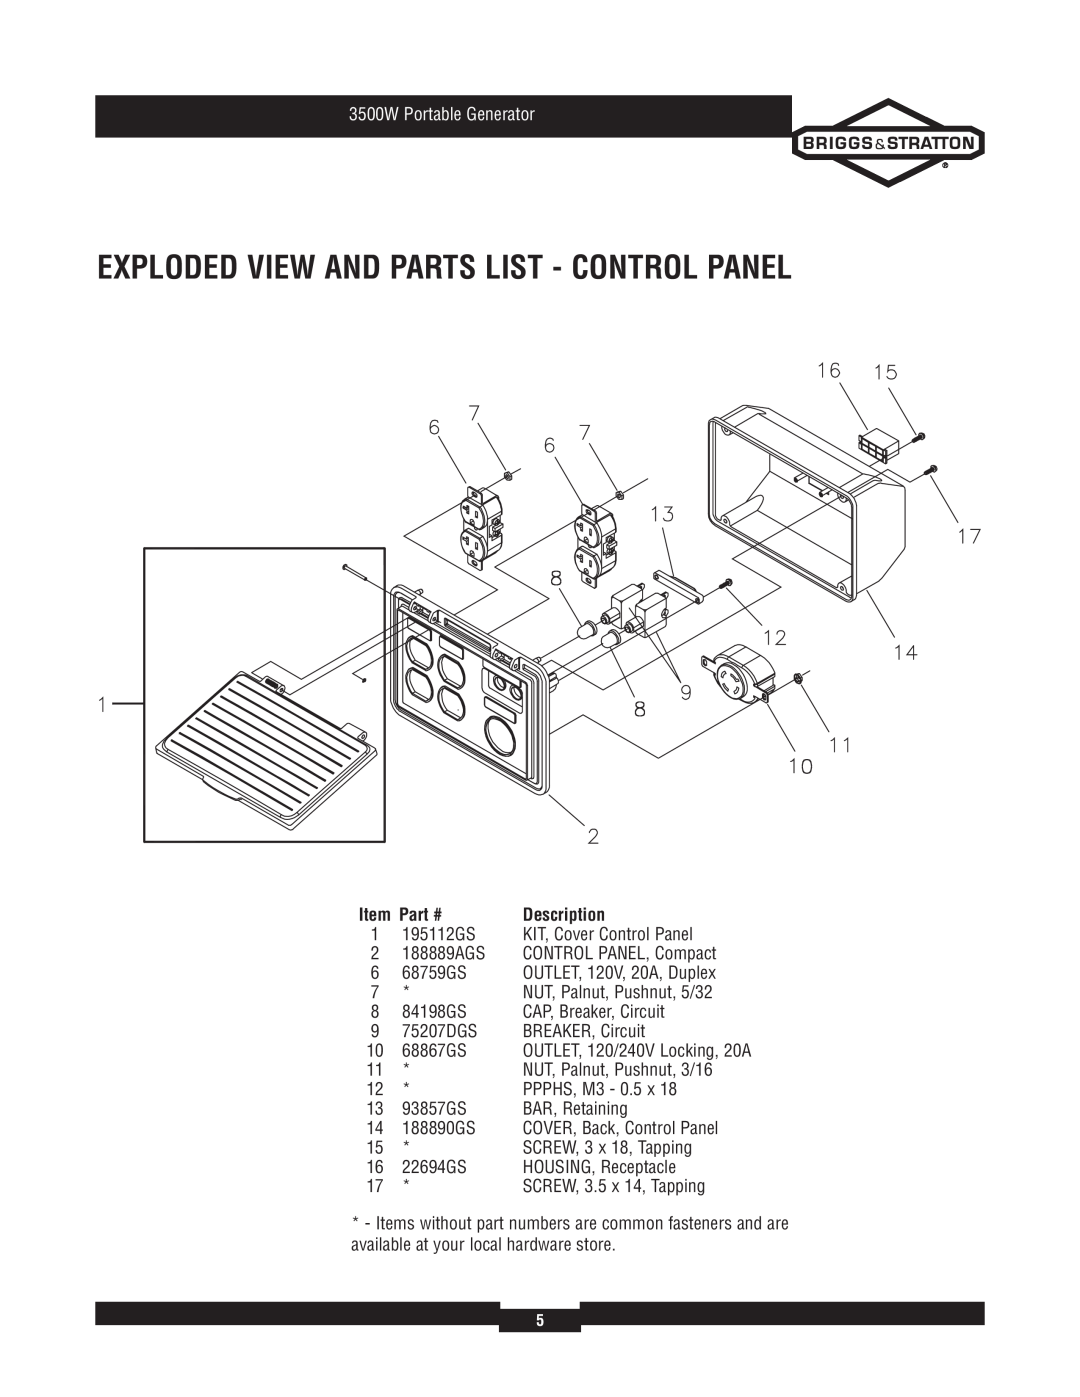 Briggs & Stratton 030208-2 manual Exploded View And Parts List - Control Panel, 3500W Portable Generator 